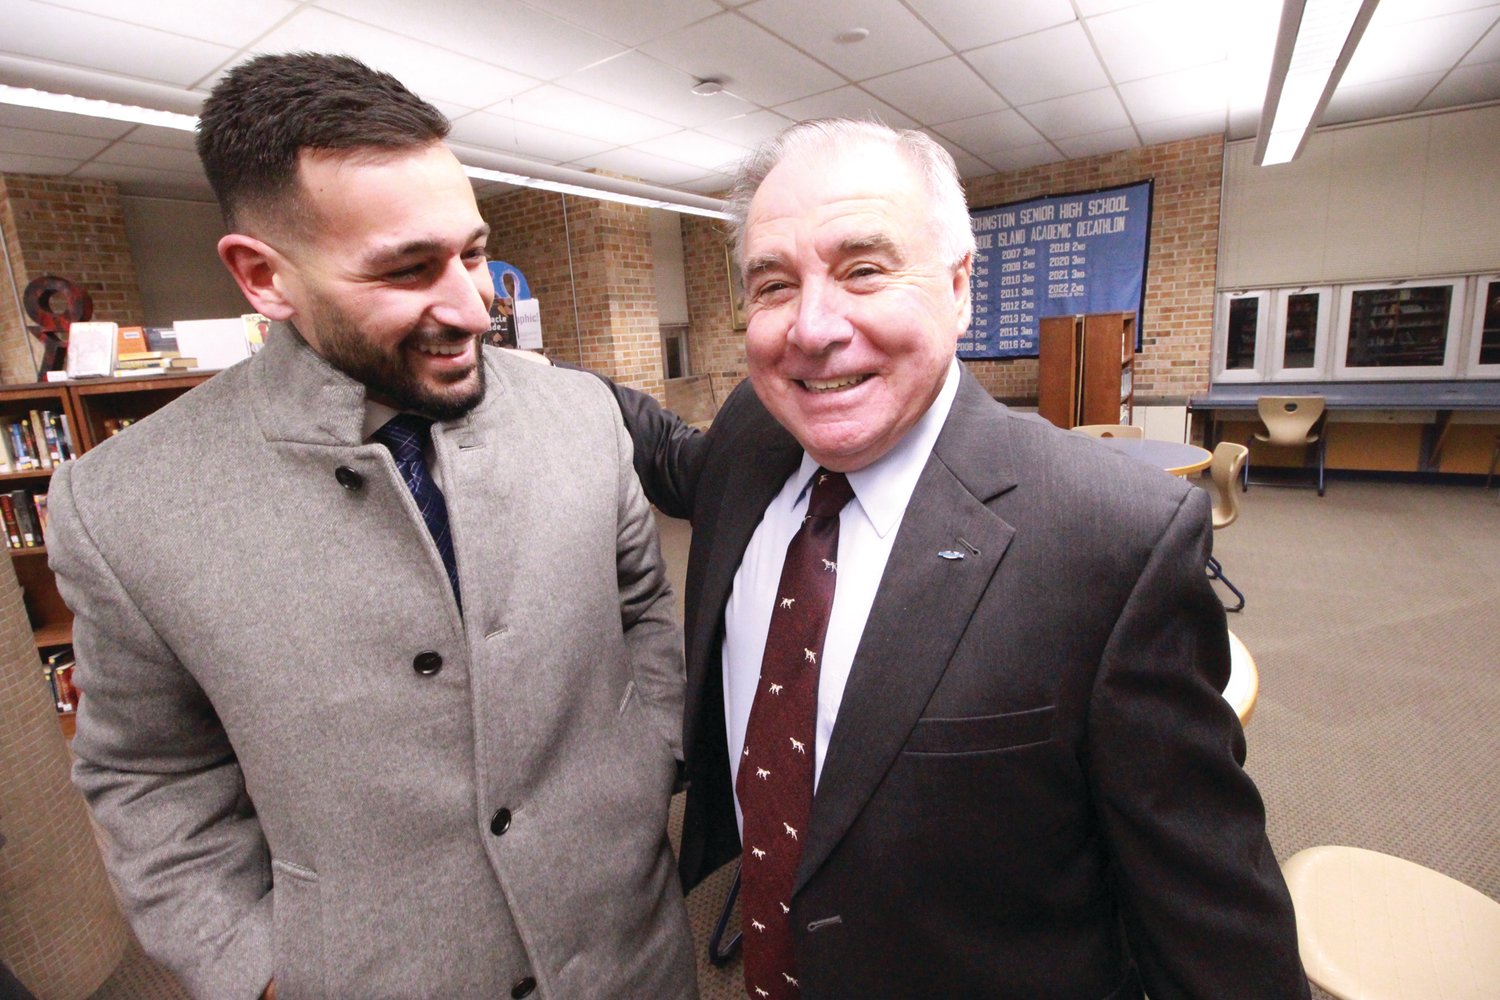 NEW MAYOR: Joseph Polisena Jr. took the oath of office on the evening of Monday, Jan. 9, becoming Johnston’s new mayor. His father, the now former mayor, swore-in the mayor-elect. Prior to the ceremony, he posed for photos with friends and political allies.